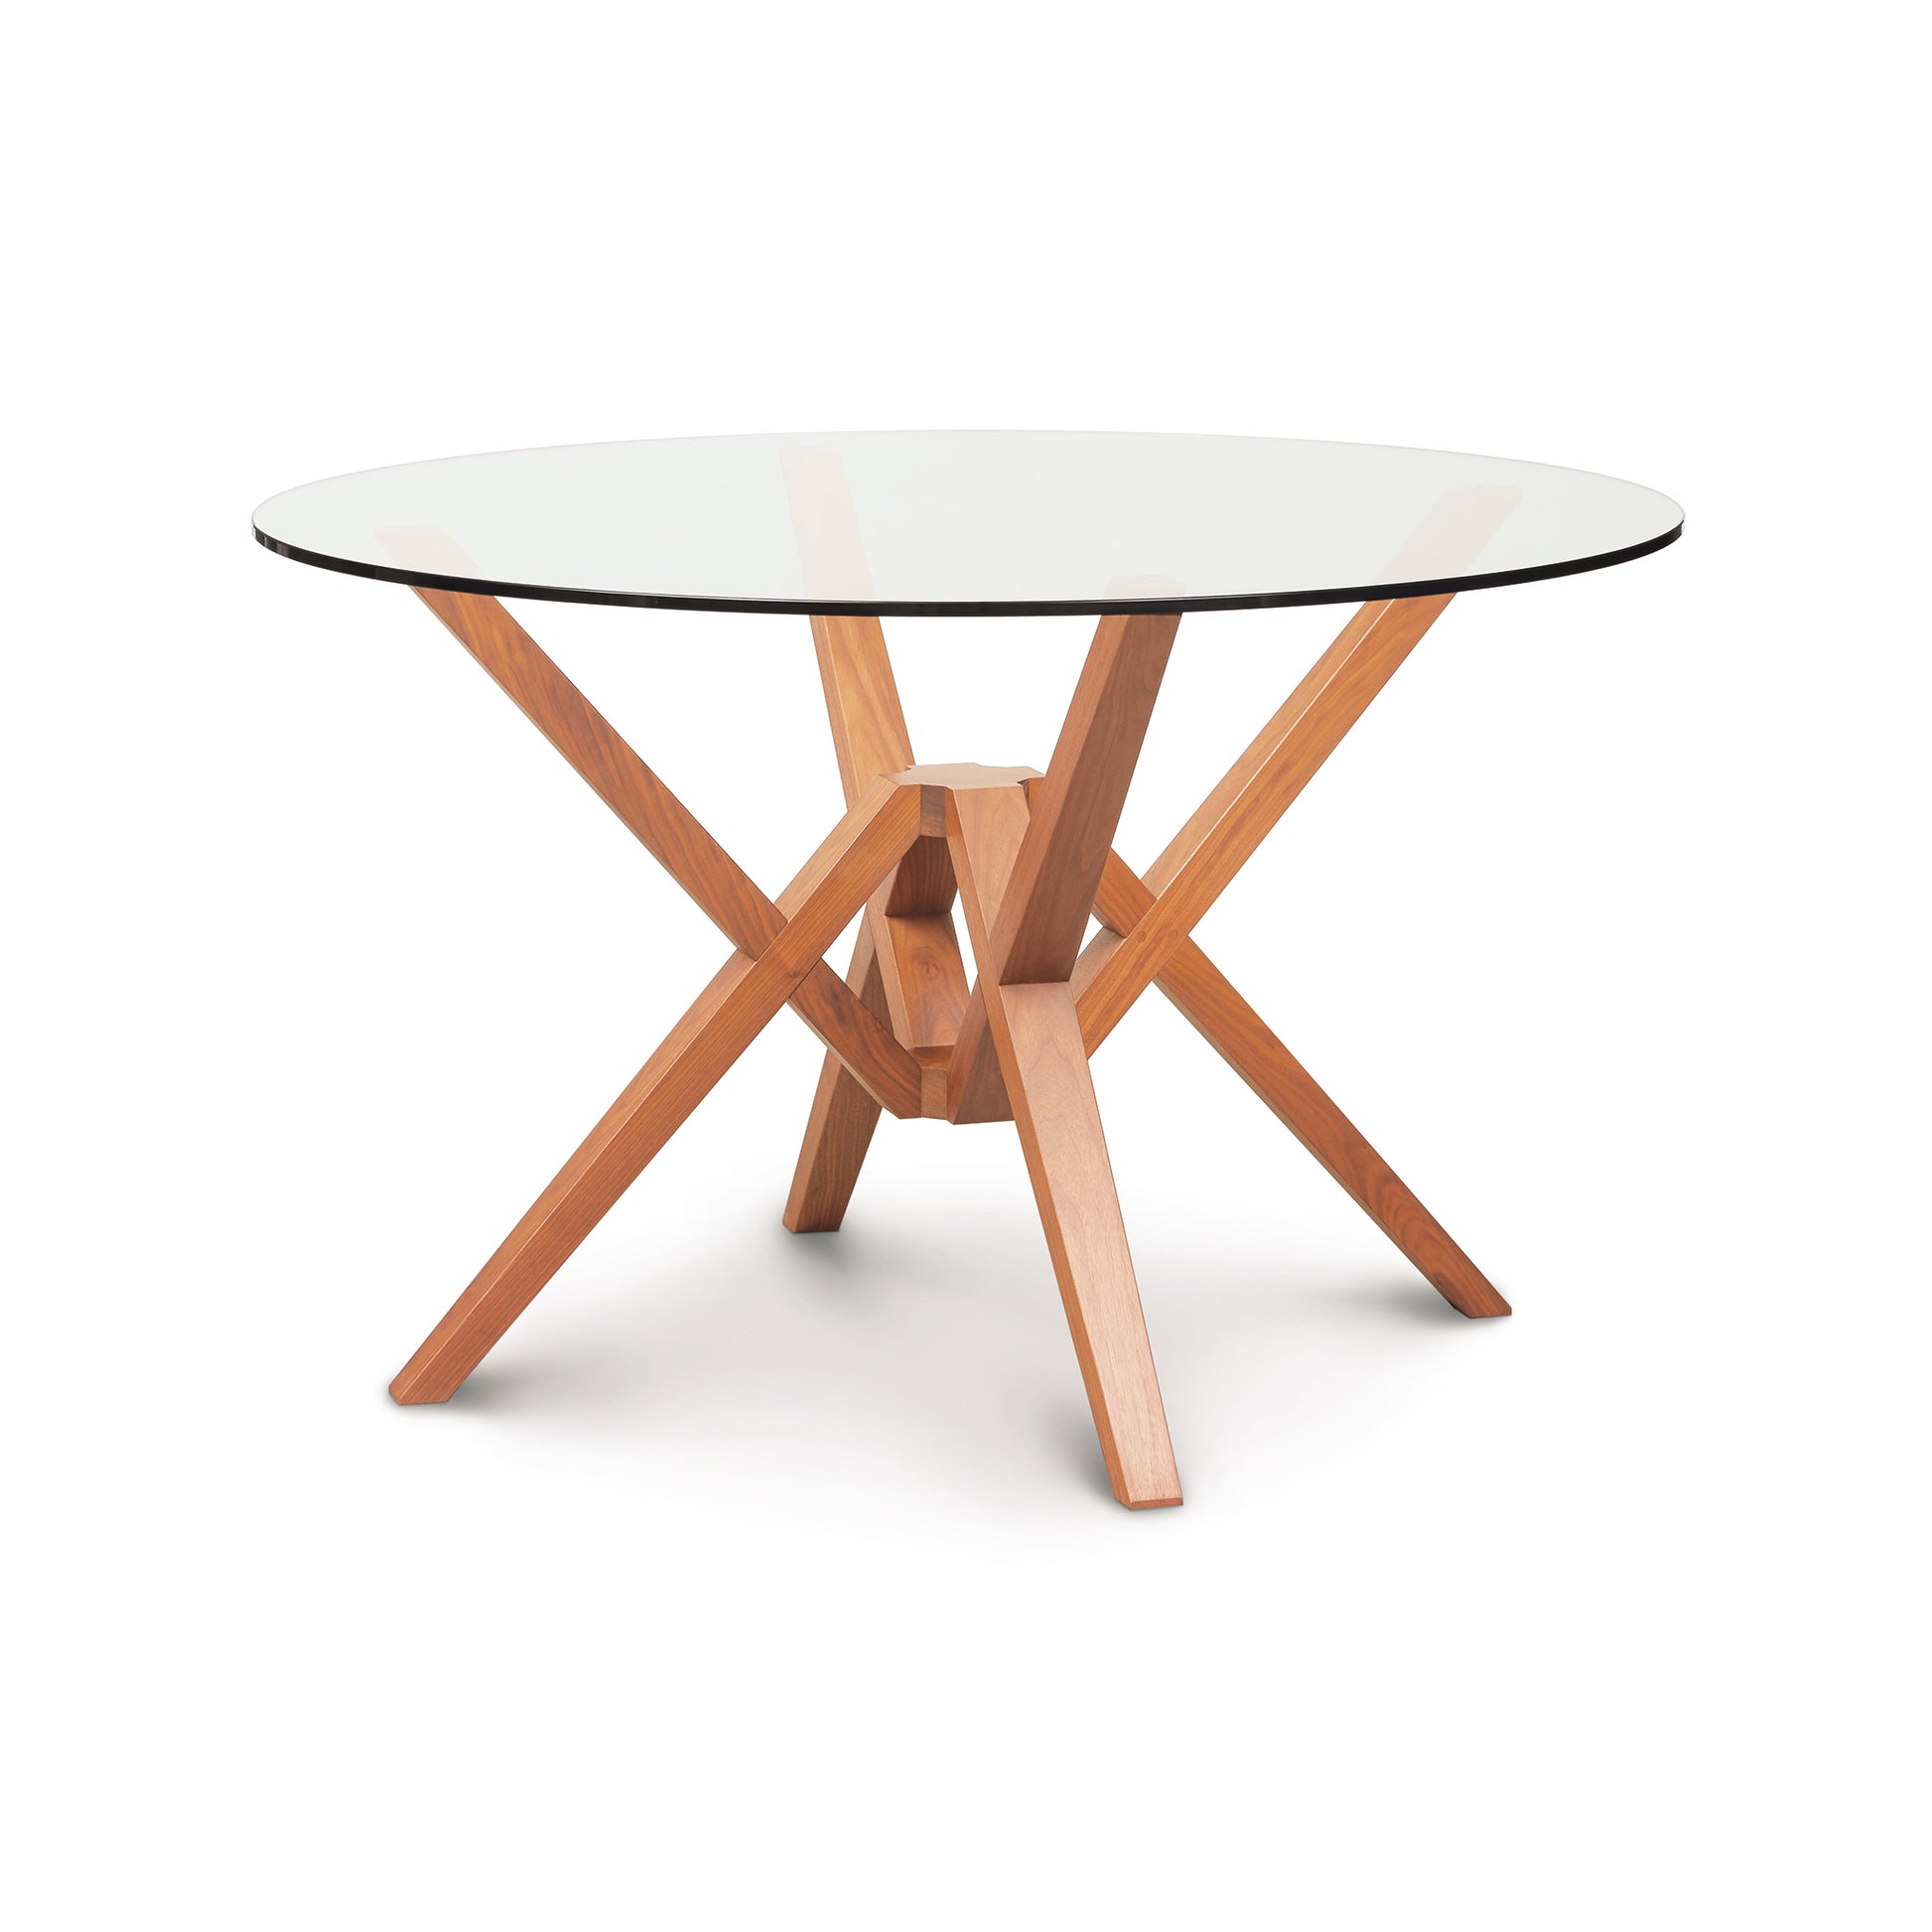 Copeland Furniture's Exeter Round Glass Top Table with a sustainably harvested hardwoods base featuring an intersecting legs design.